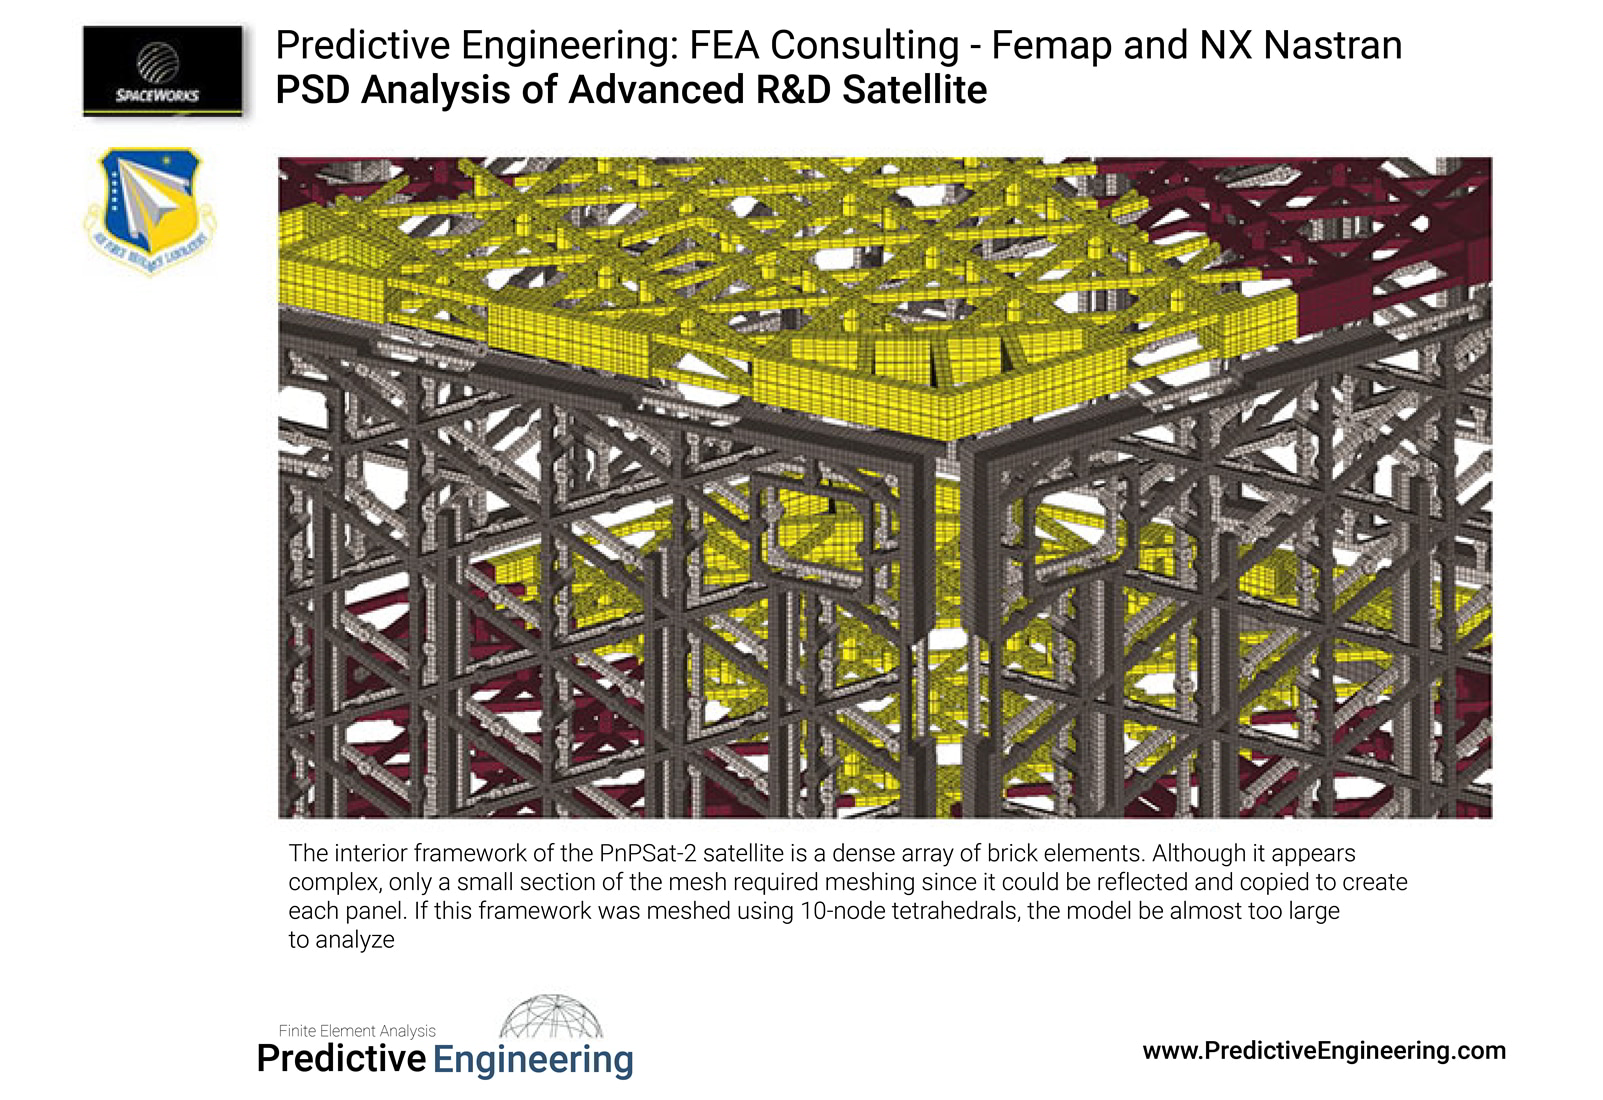 The interior framework of the PnPSat-2 satellite is a dense array of brick elements - FEA Vibration Services - Digital Twin Experts